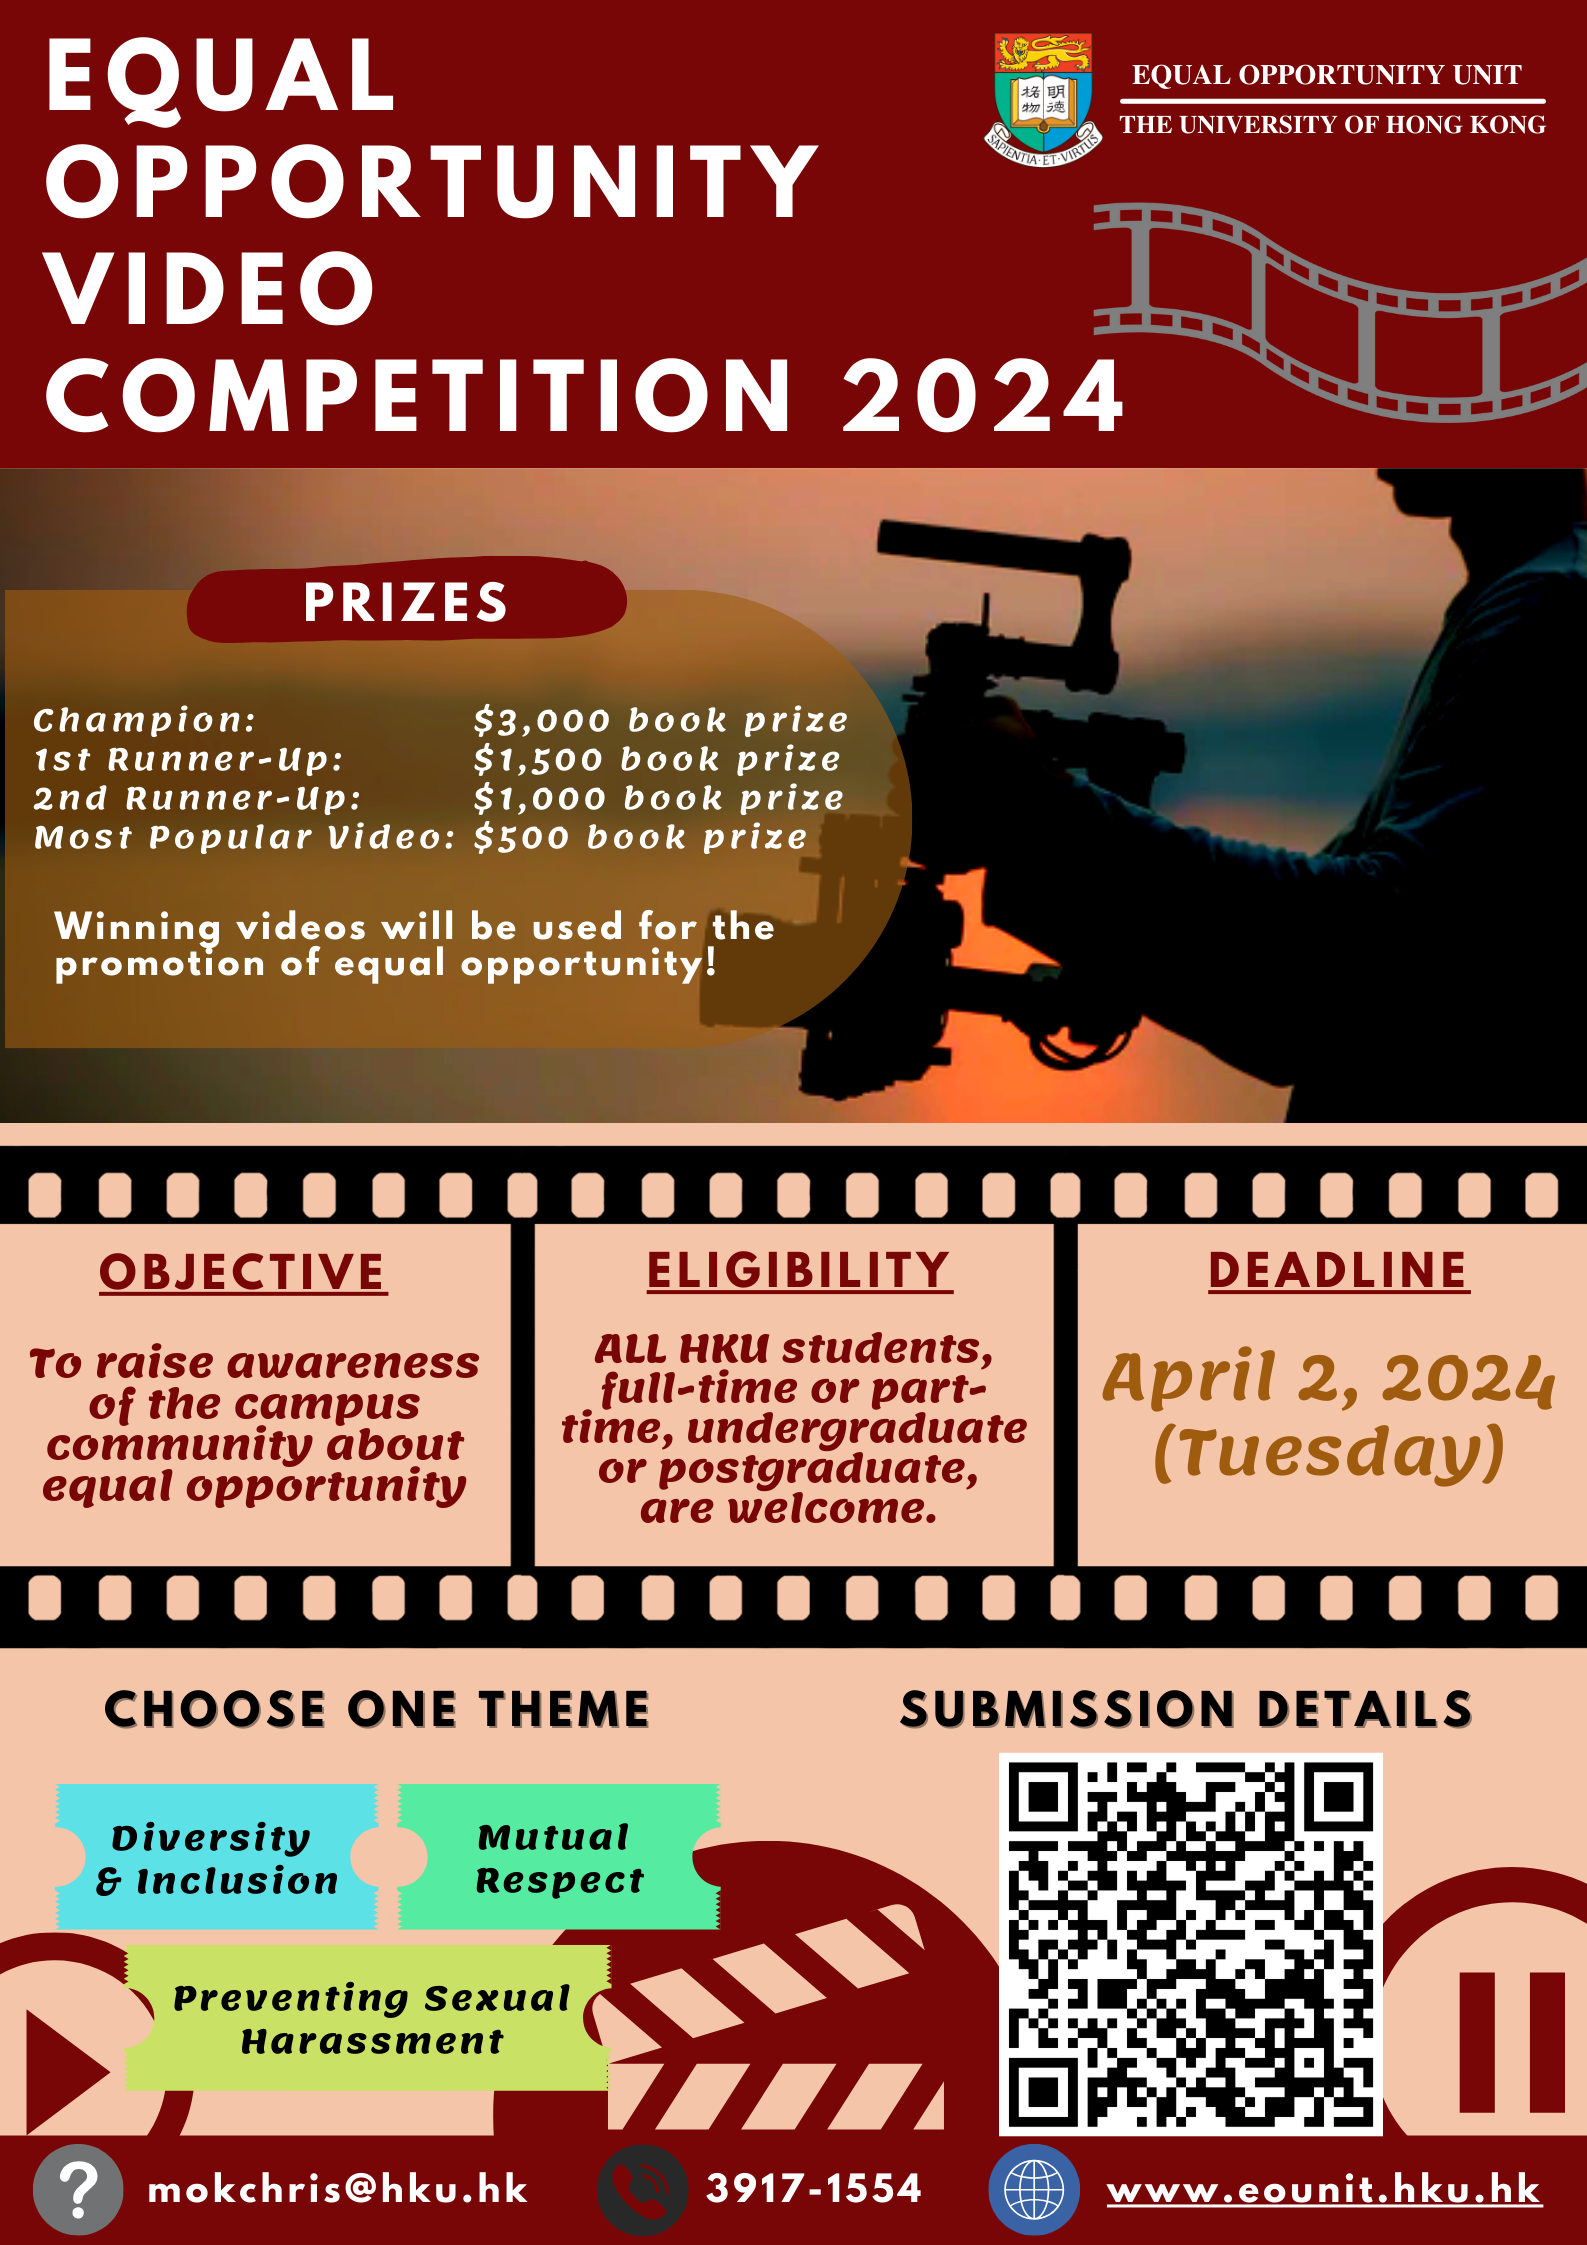 Equal Opportunity Video Competition 2024 Poster. Details same as content.